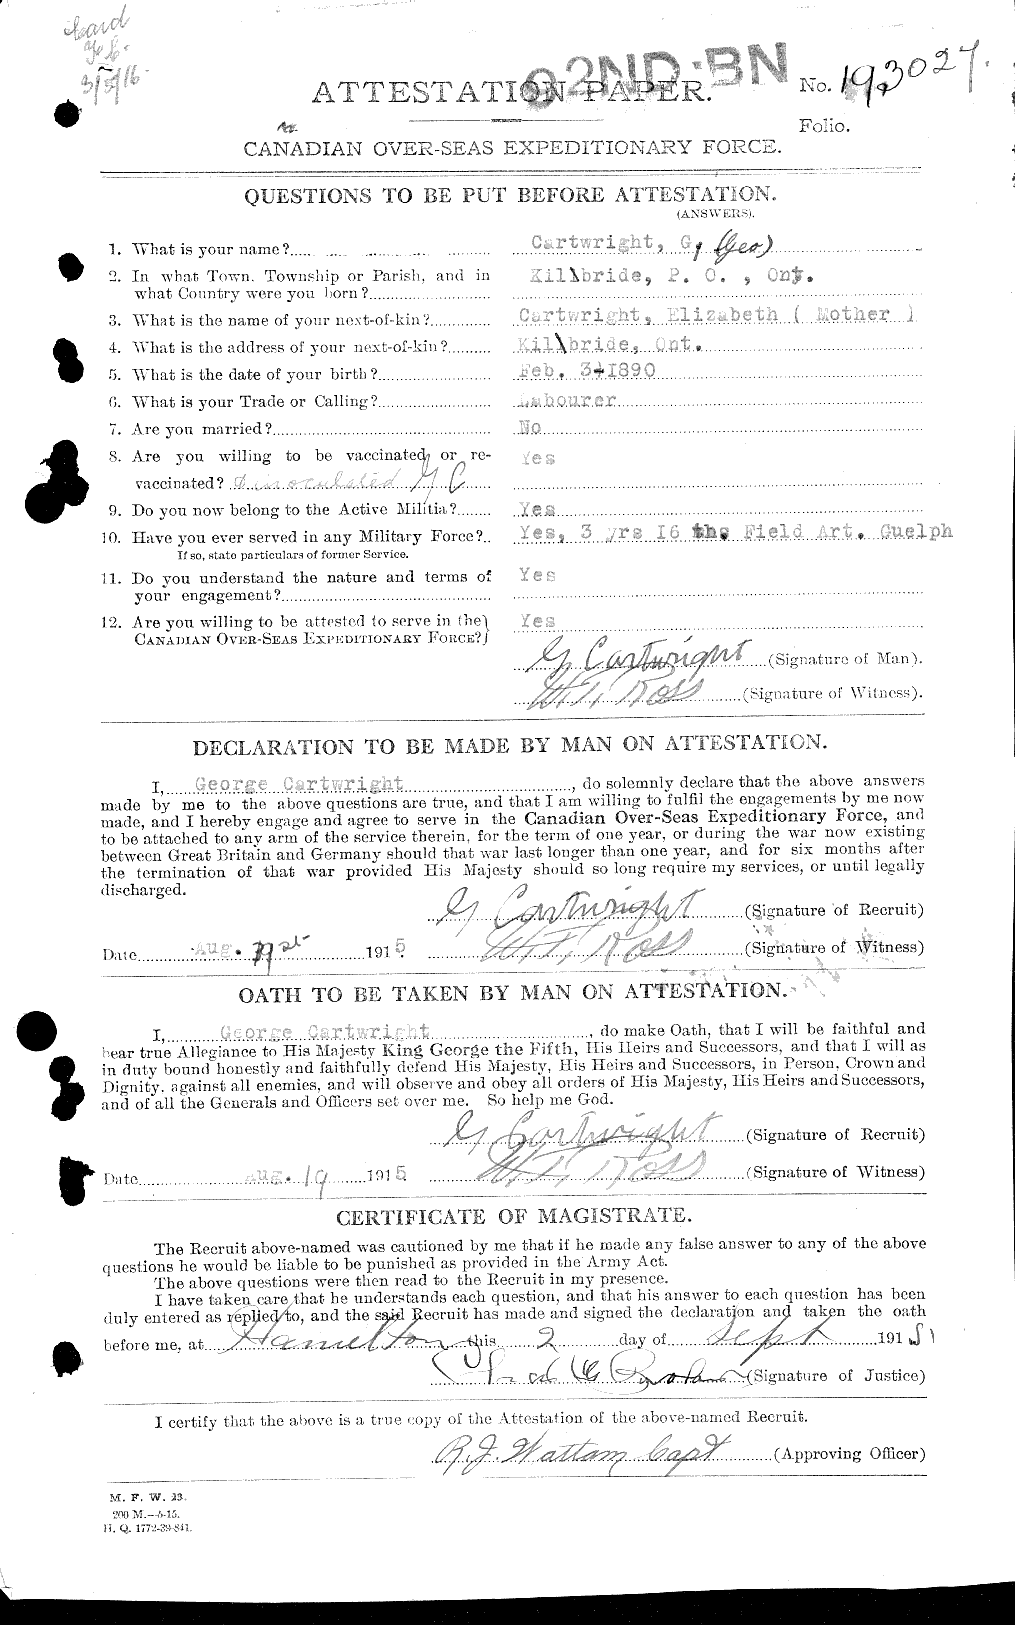 Personnel Records of the First World War - CEF 011575a